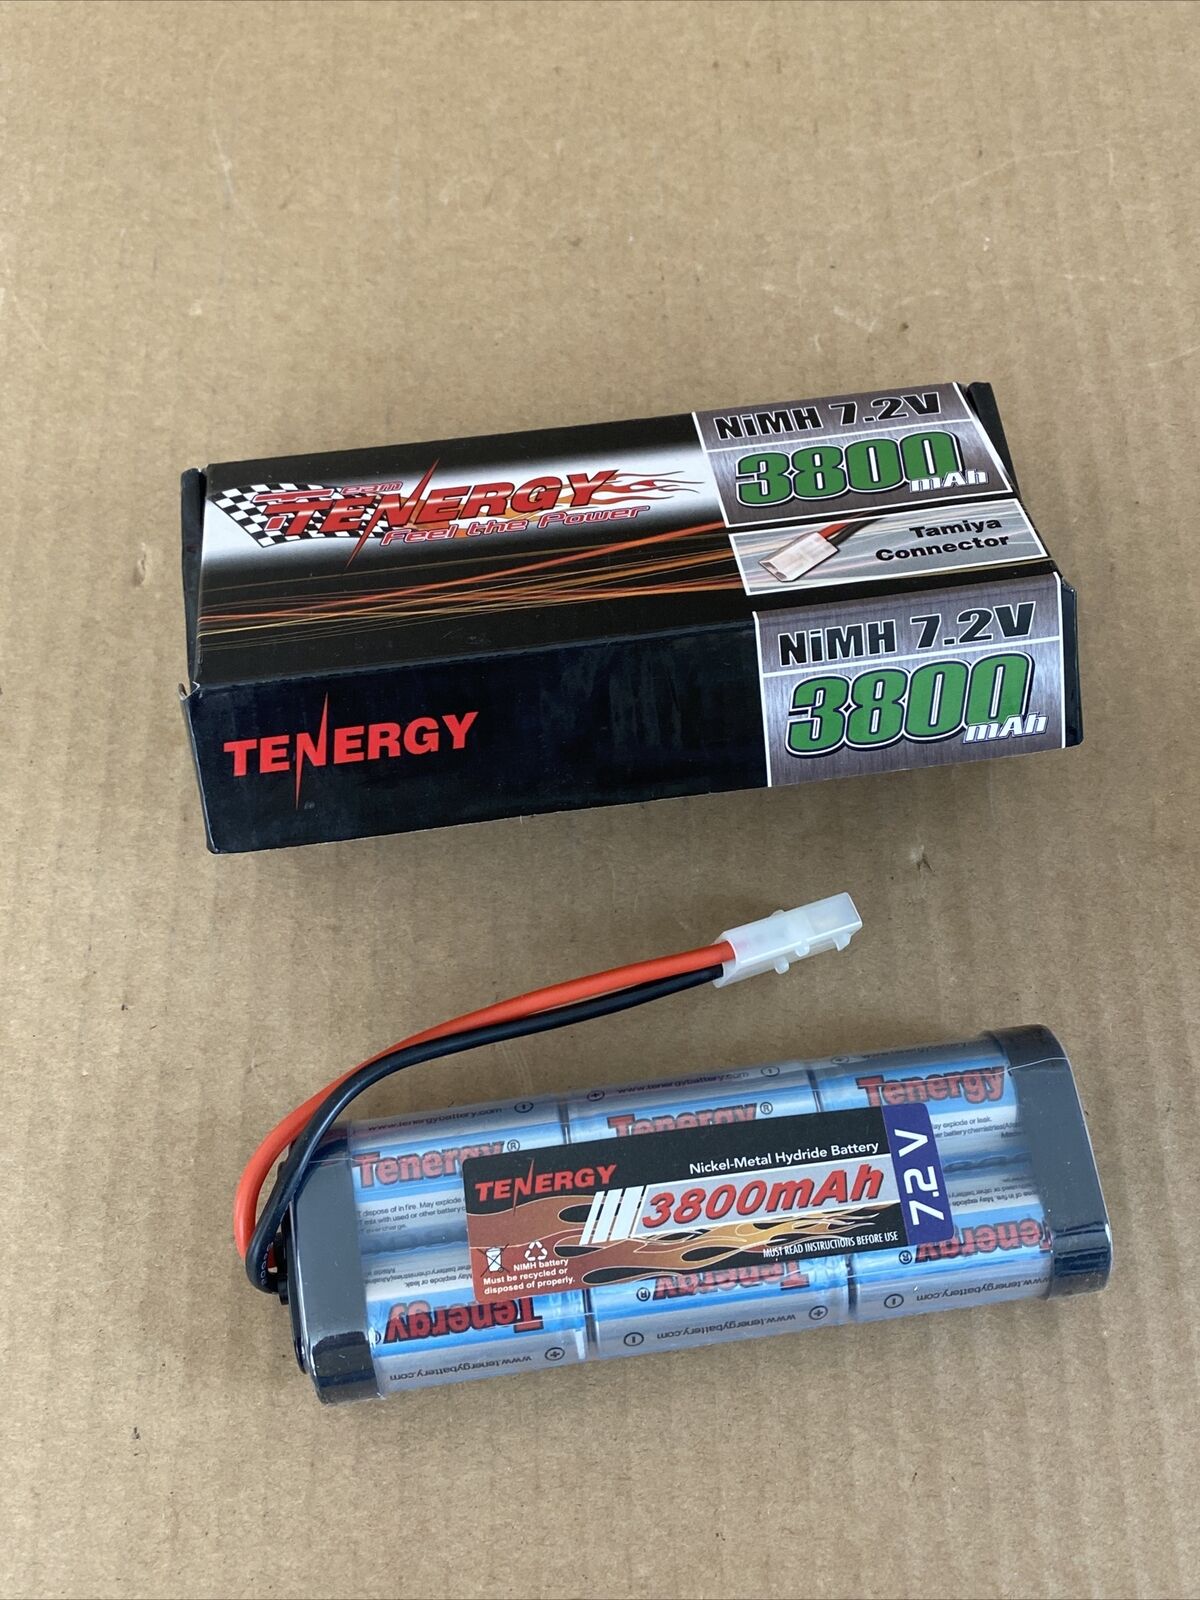 Tenergy 7.2V 3800mAh 6-Cell NiMH Rechargeable Battery Pack For RC Cars w/ Tamiya